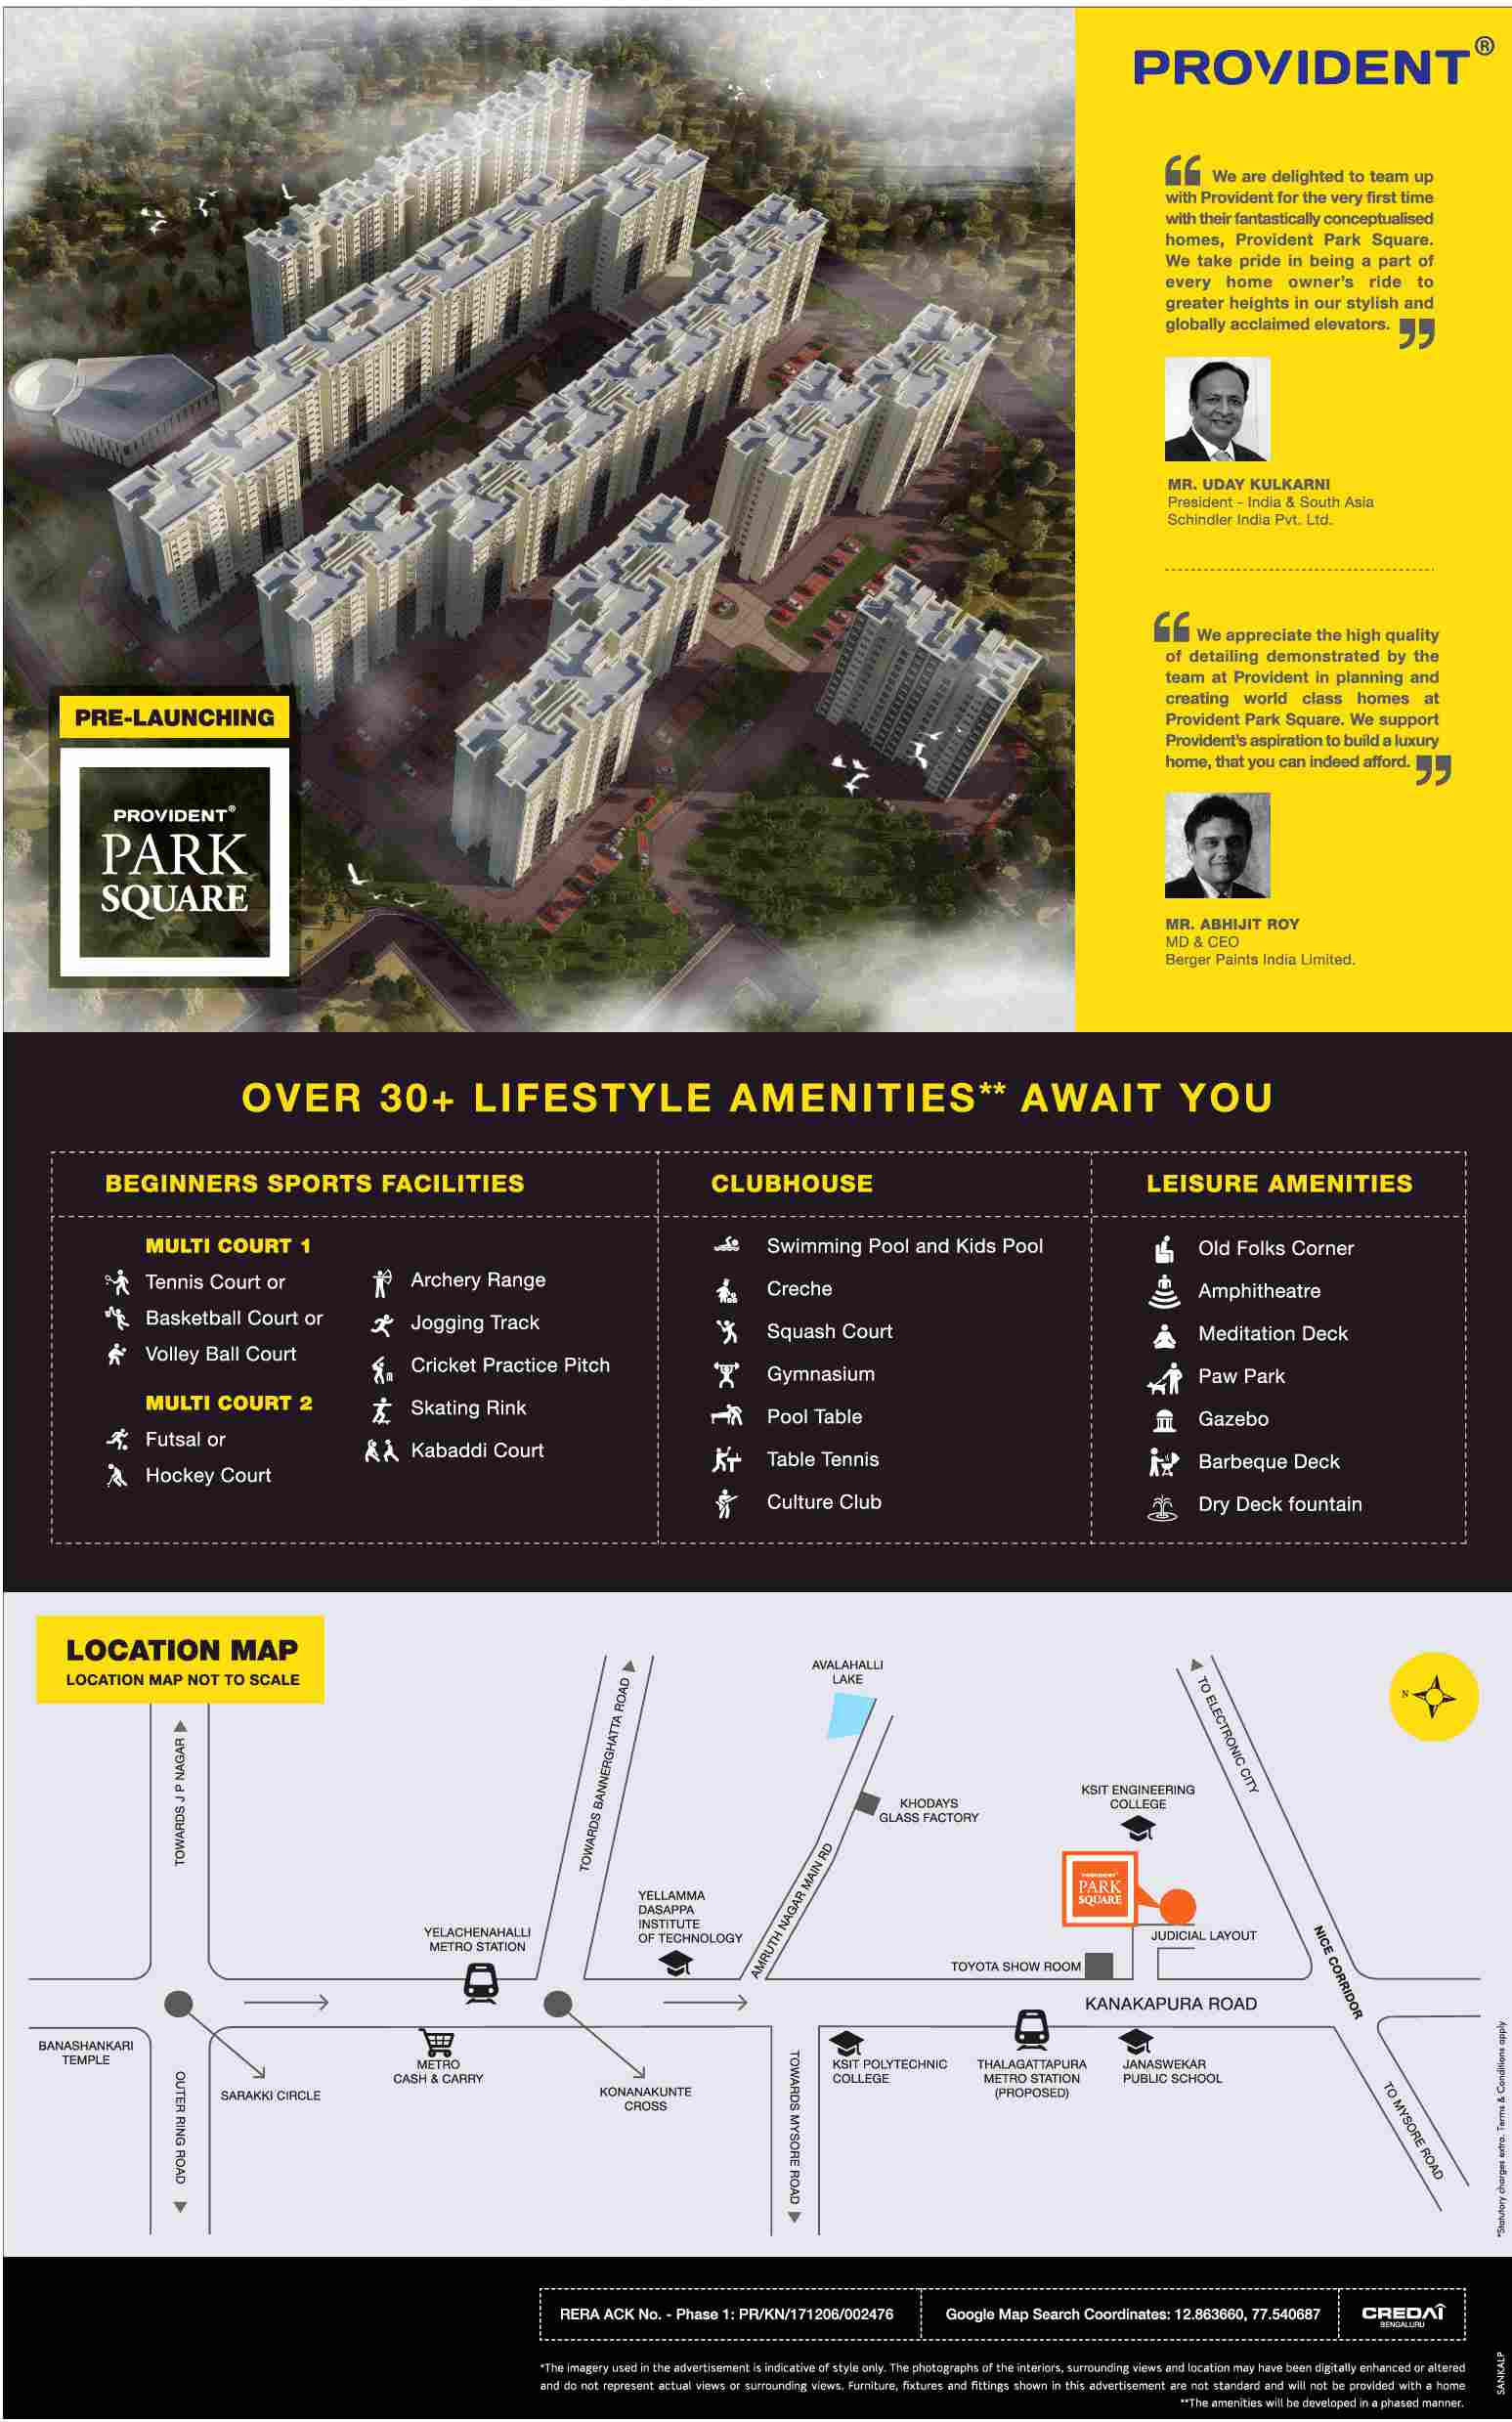 Over 30+ lifestyle amenities awaits you at Provident Park Square in Bangalore Update